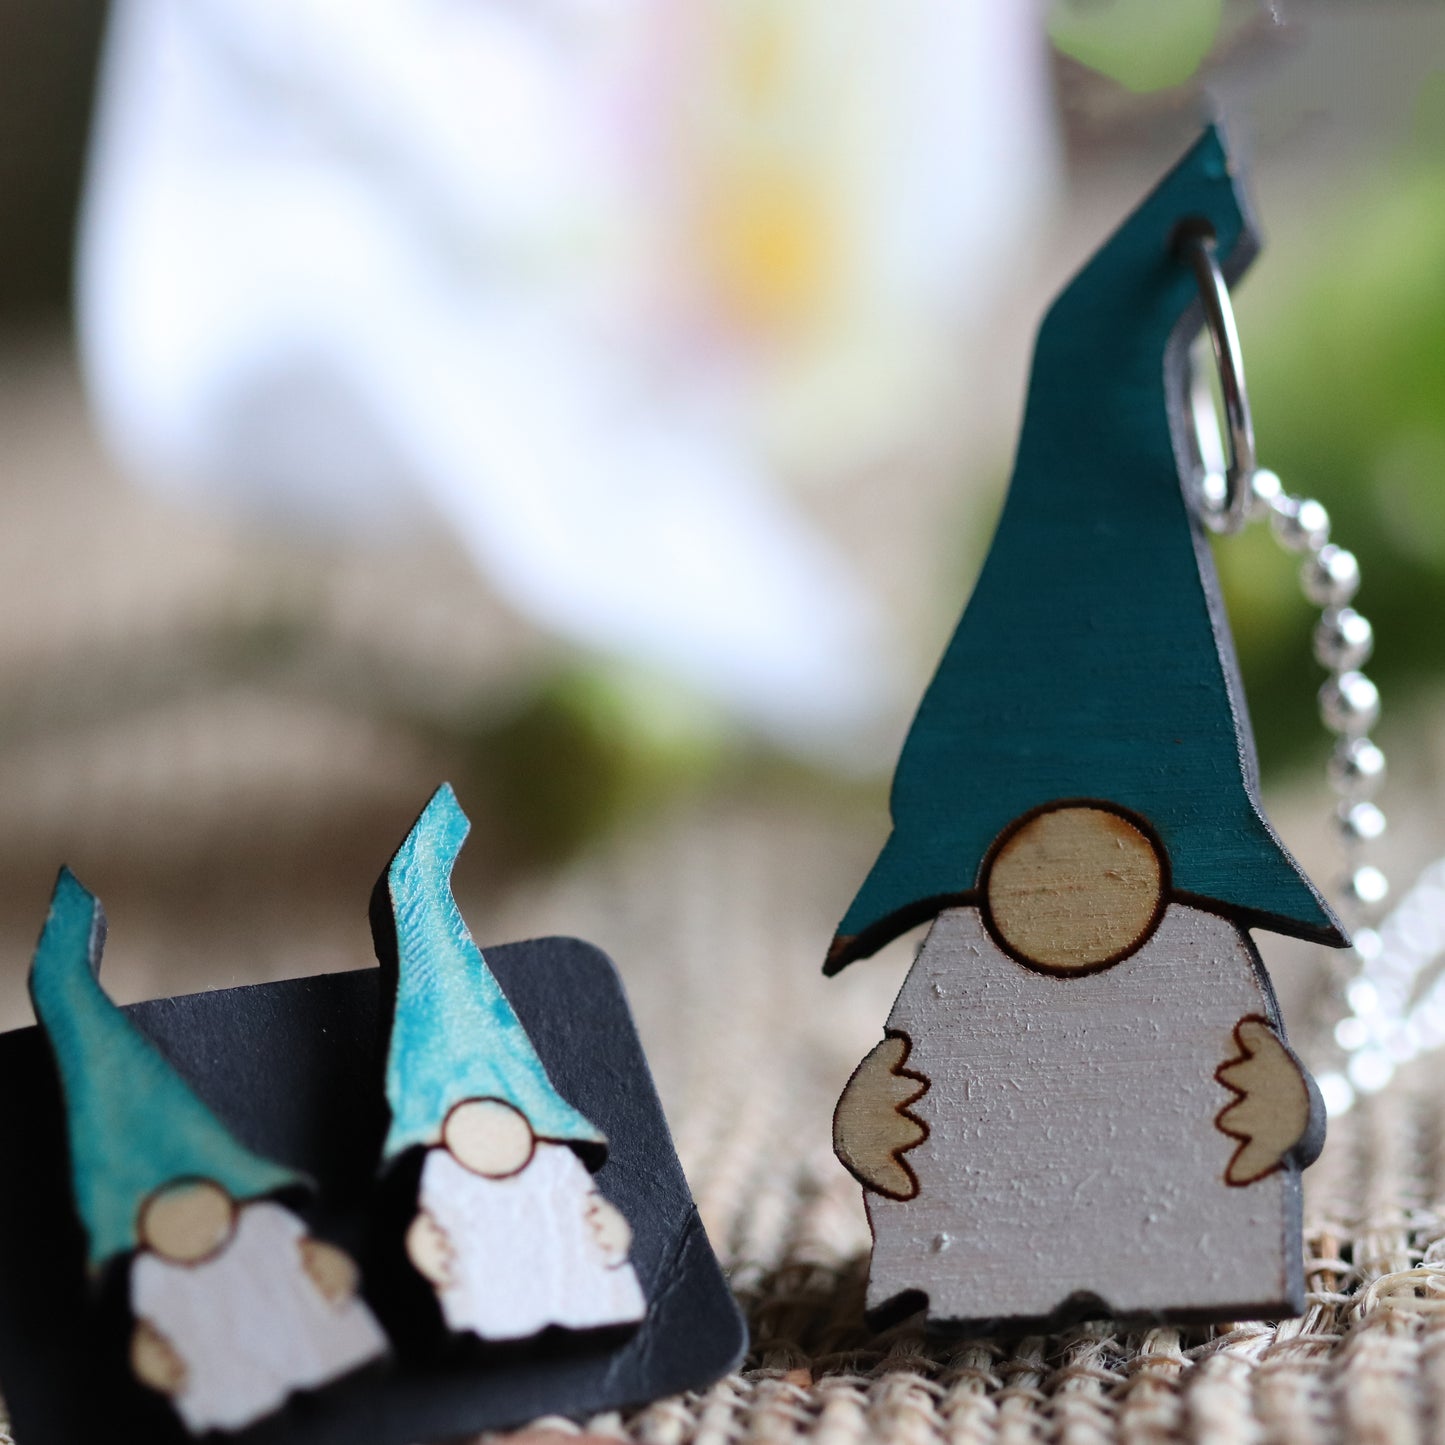 Gnome Love Earrings and Pendant